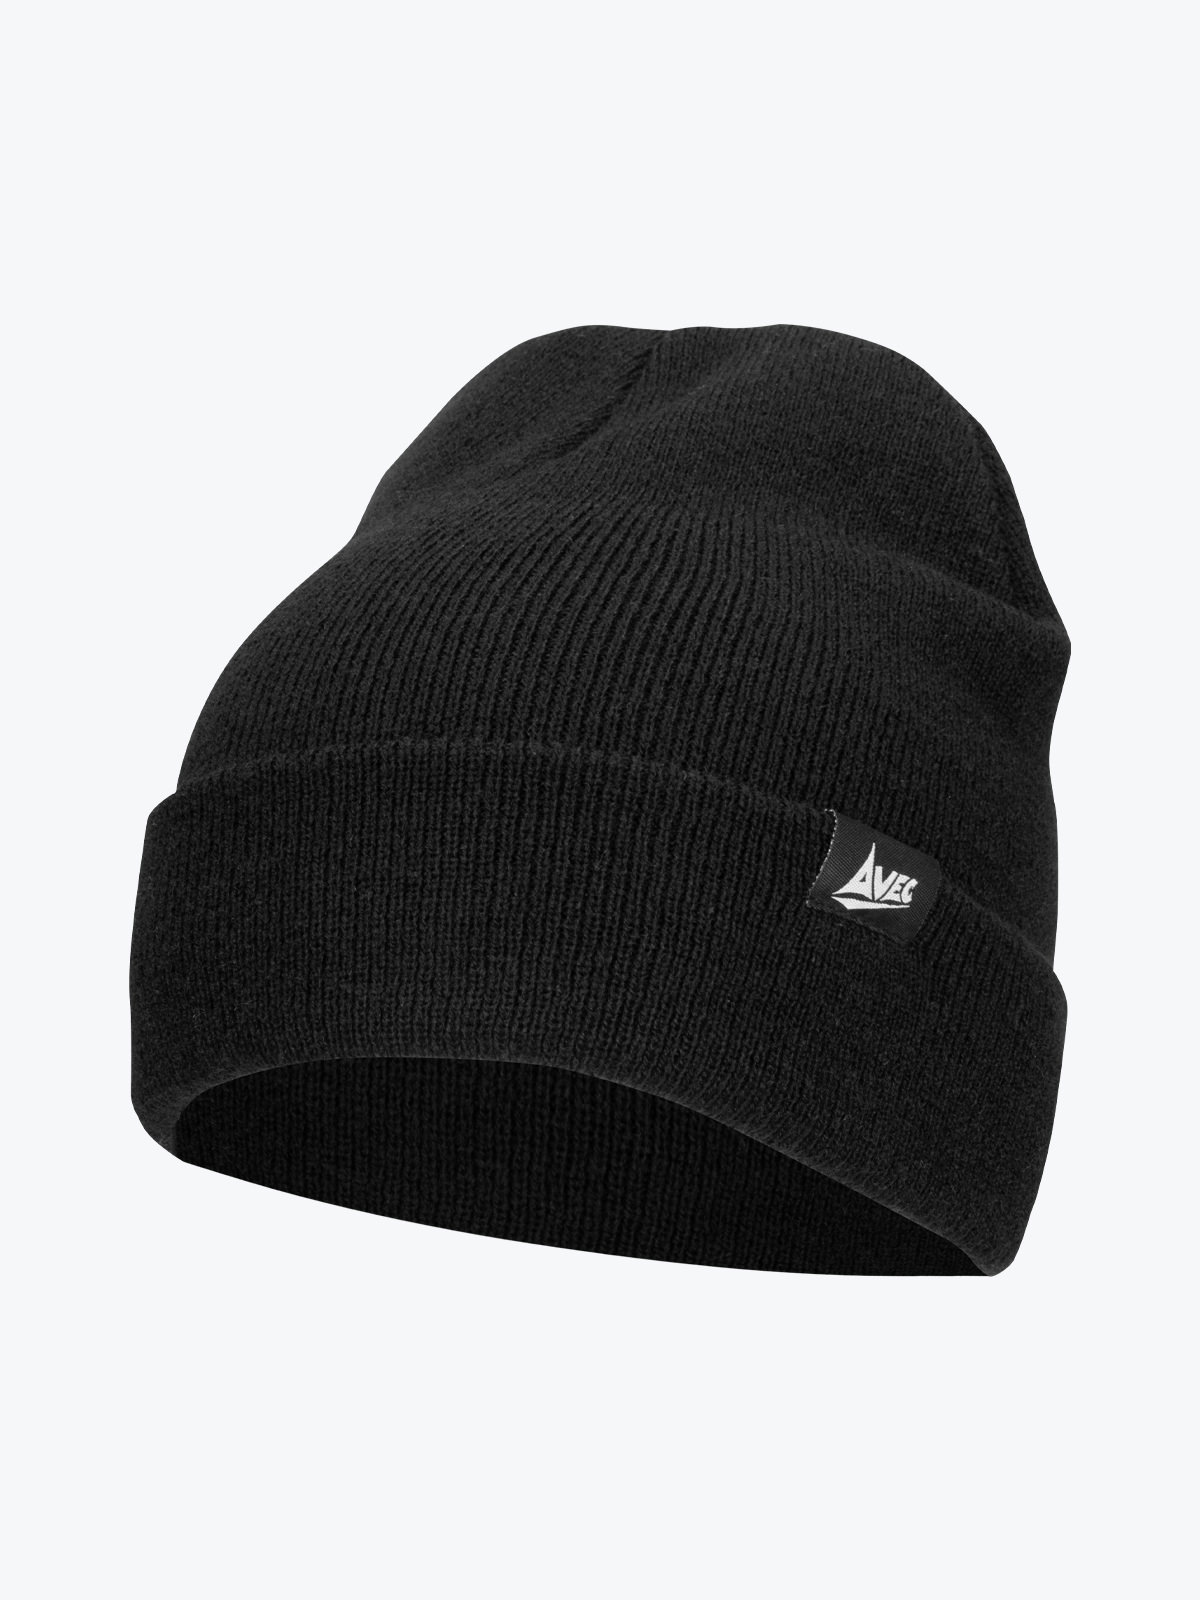 picture of beanie hat - black